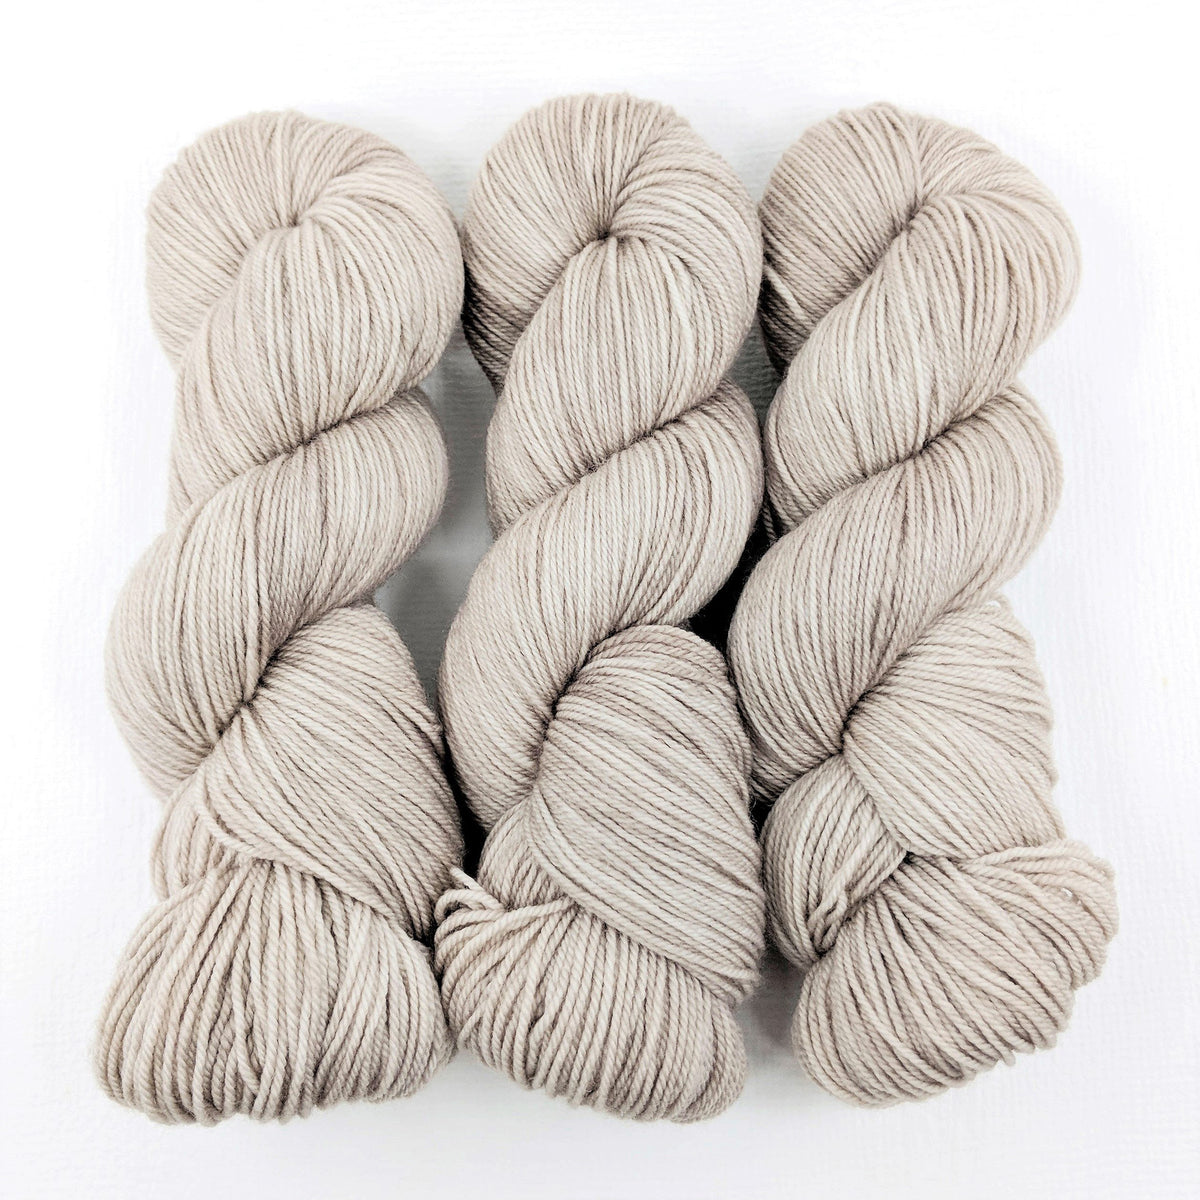 The Softer Side of Linen in Worsted Weight